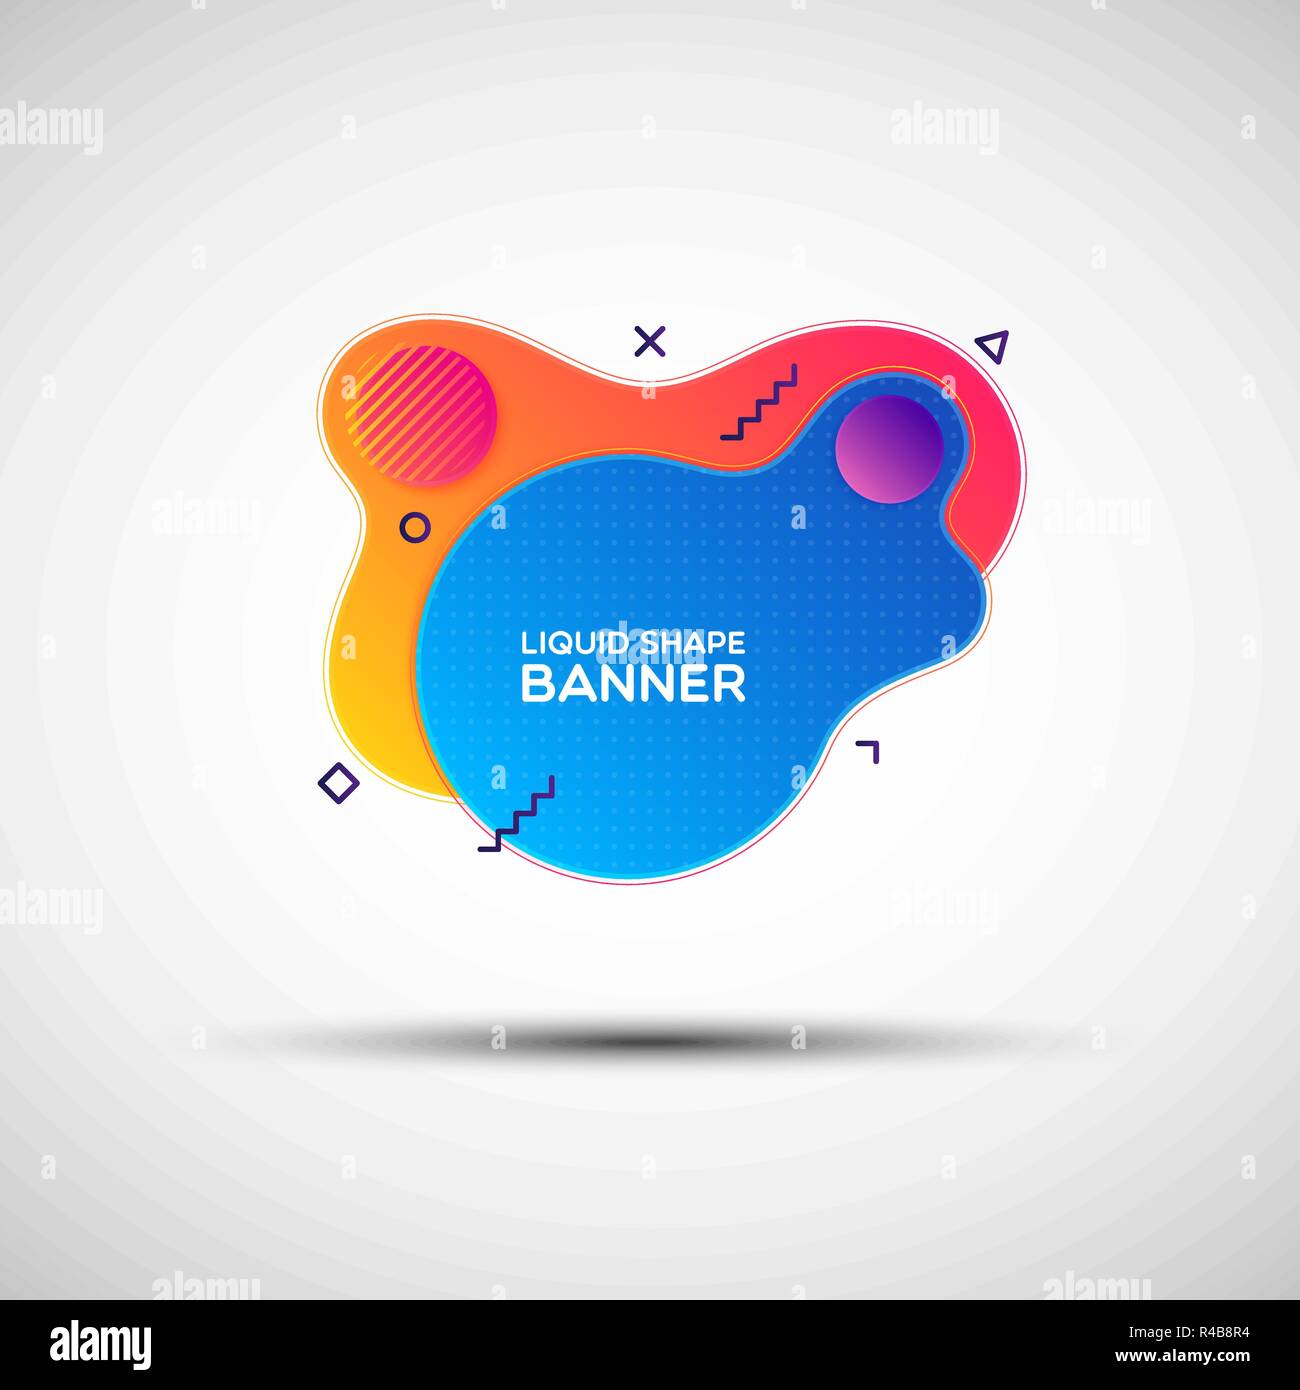 Modern liquid shape gradient sale banner. Vector illustration of abstract colorful fluid banner made of different simple shapes for your design Stock Vector